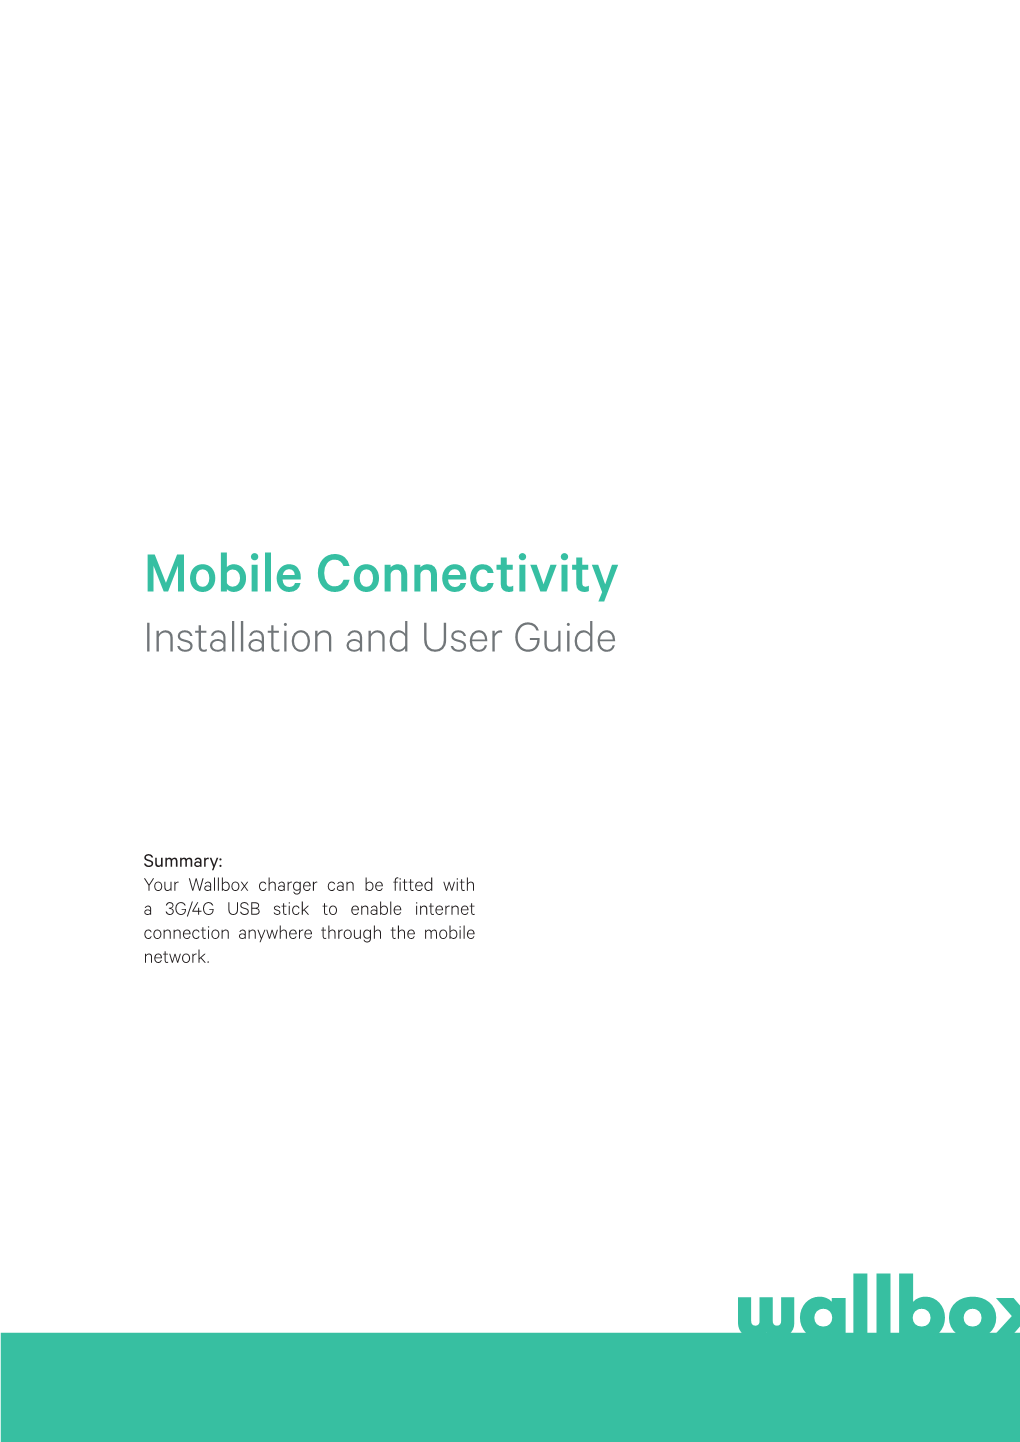 Mobile Connectivity Installation and User Guide